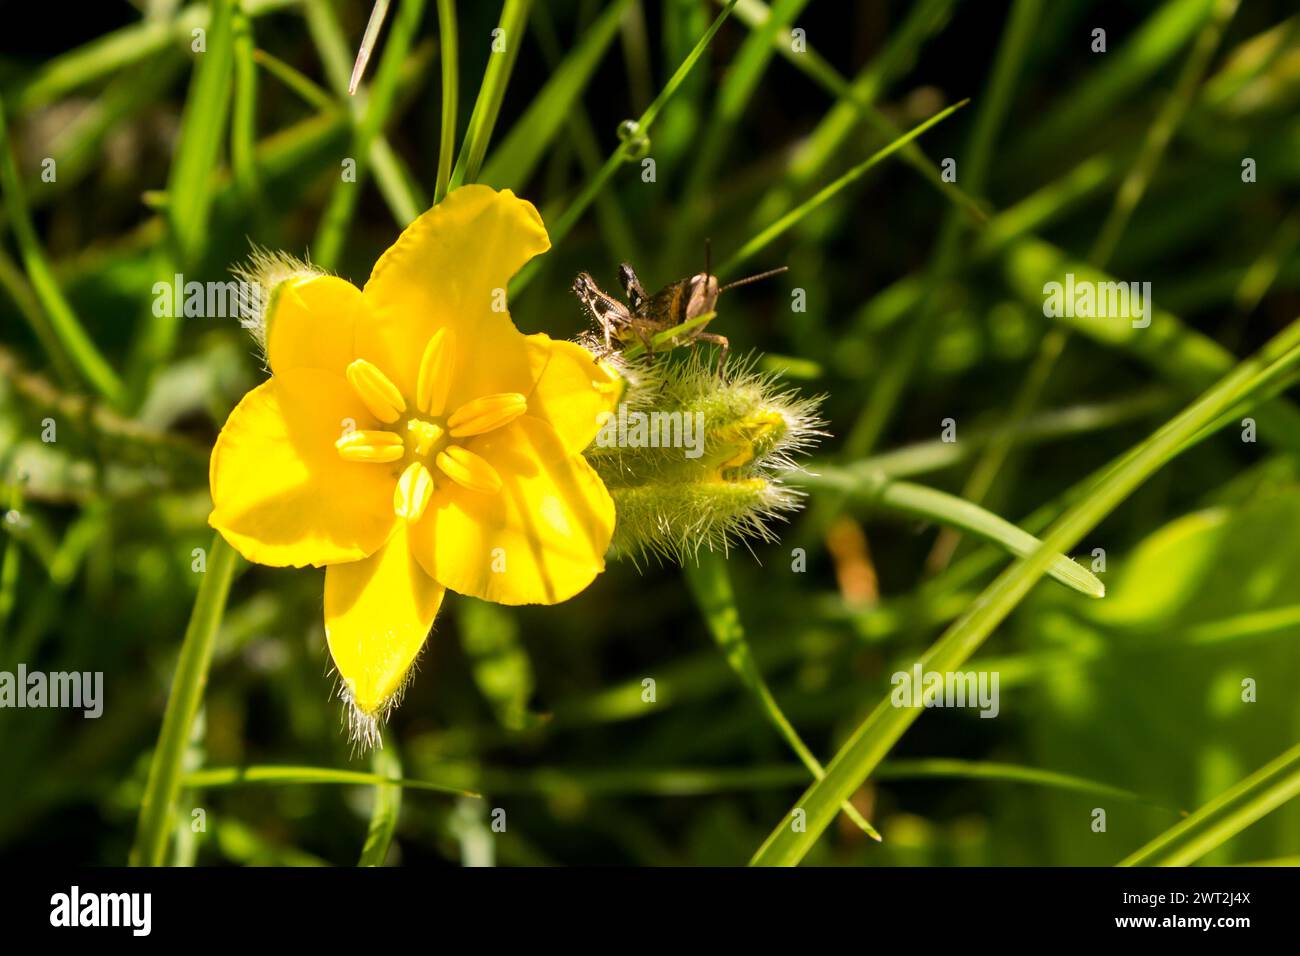 The Beautiful large yellow flowers of a Star flower, Hypoxis hemerocallidea, Stock Photo